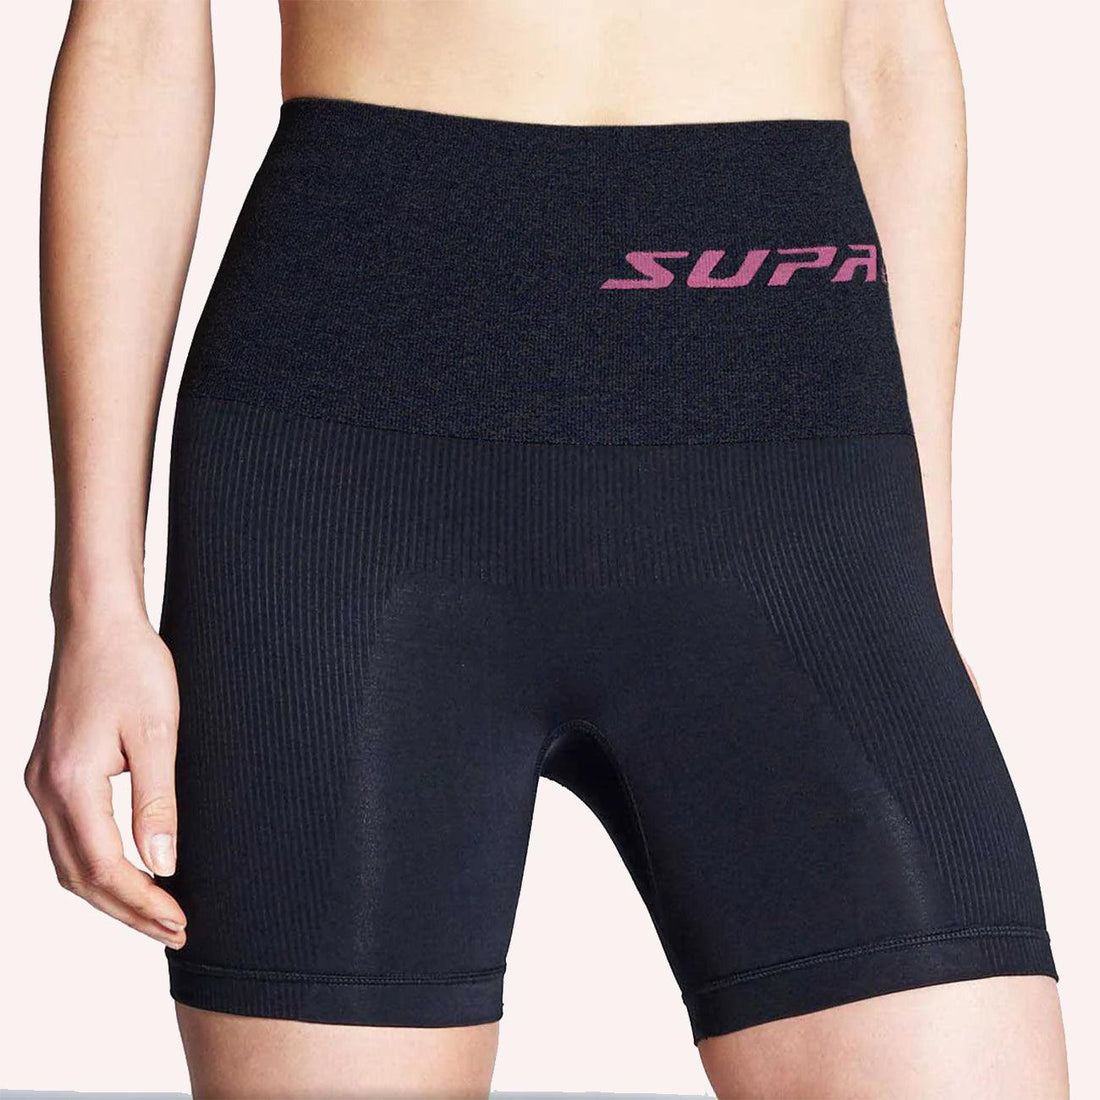 Injury Recovery & Postpartum Compression Shorts